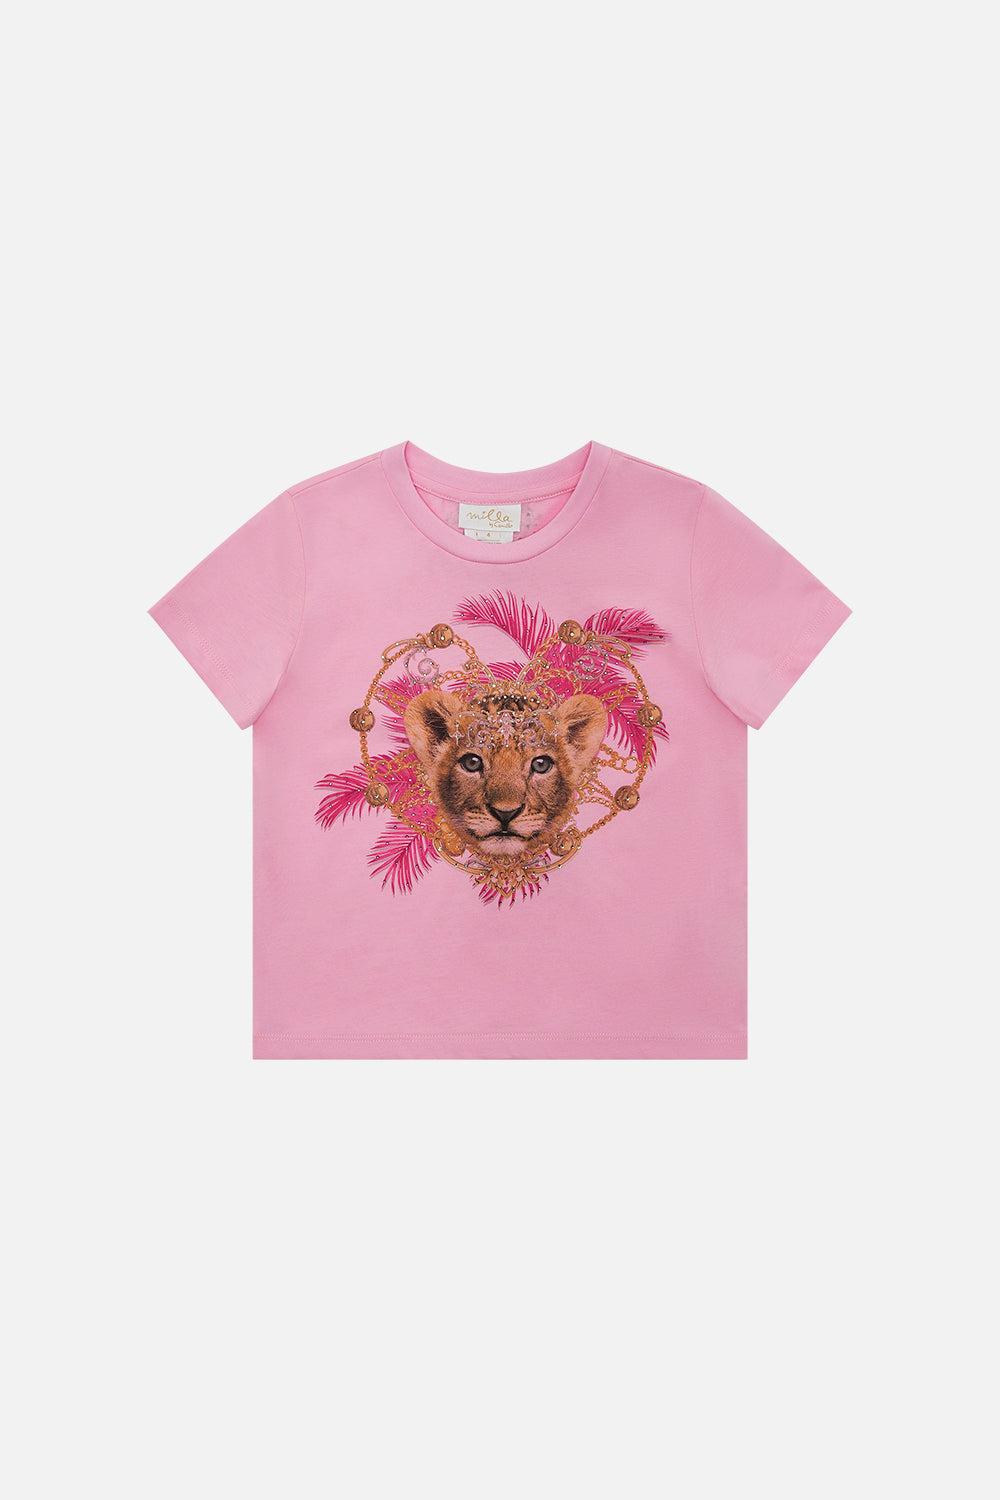 Product view in MILLA BY CAMILLA kids pink graphic tee in Tiptoe The Tightrope print